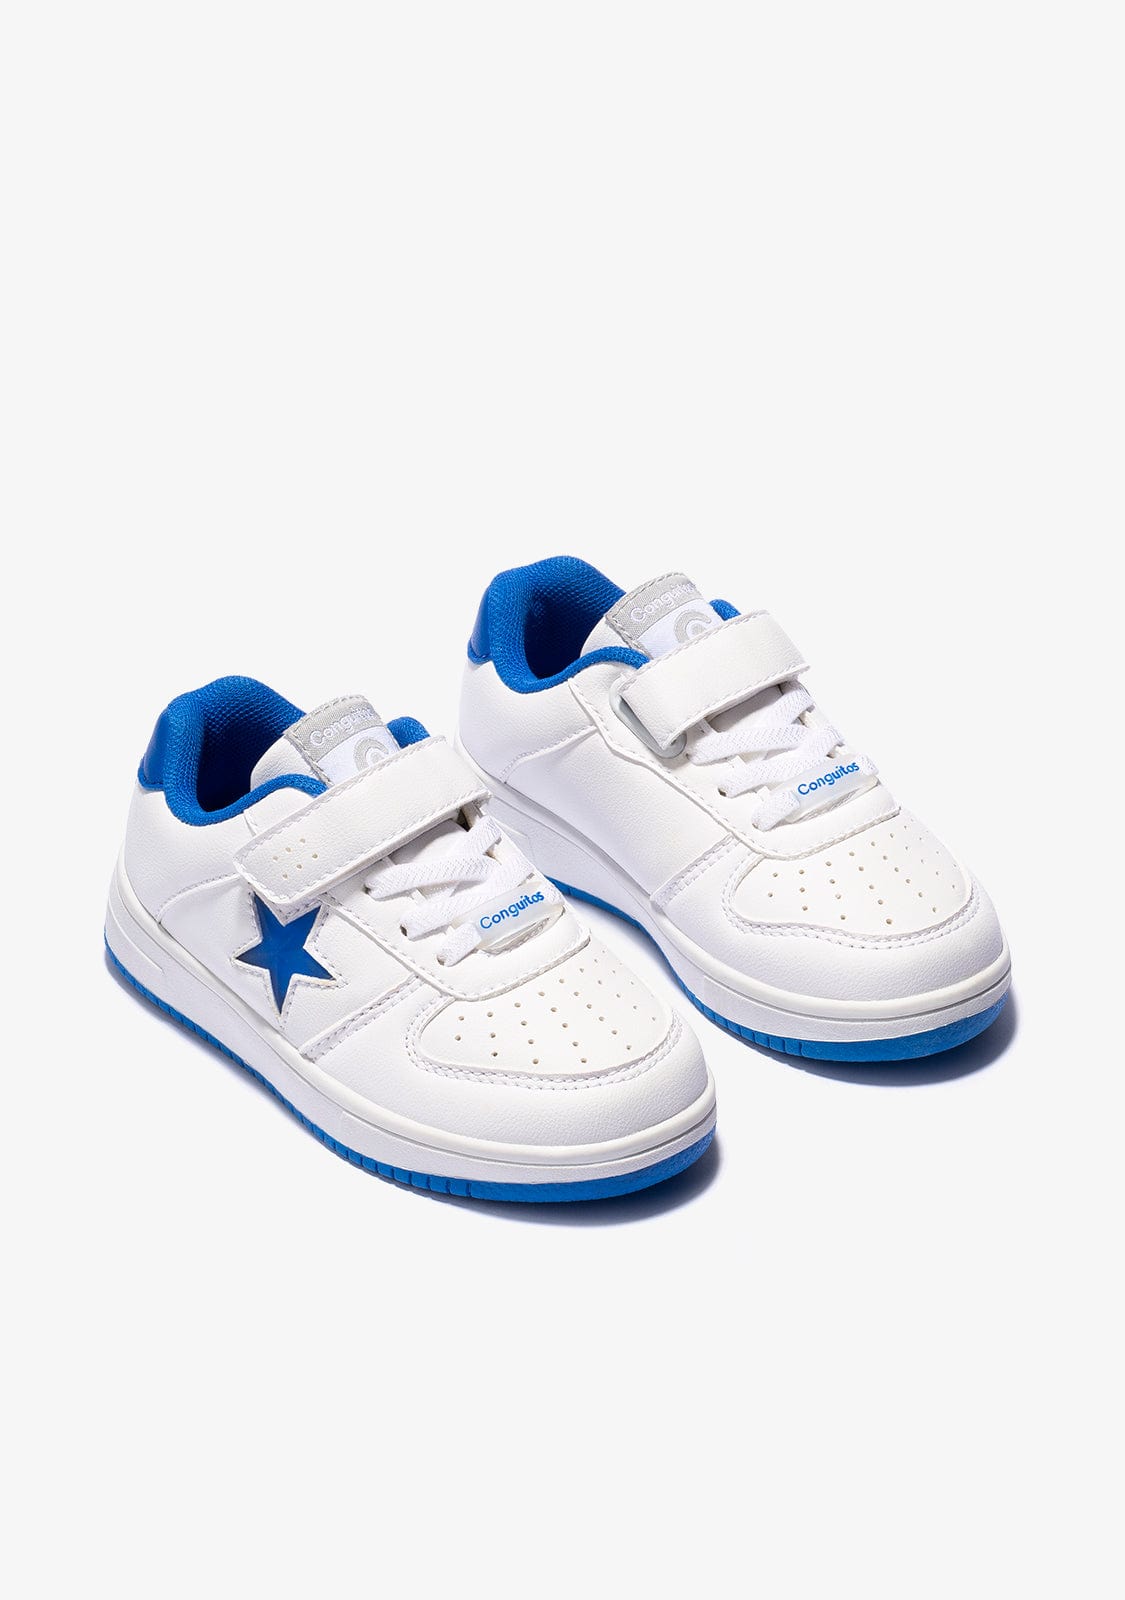 CONGUITOS Shoes Unisex White With Lights Star Sneakers Micronapa